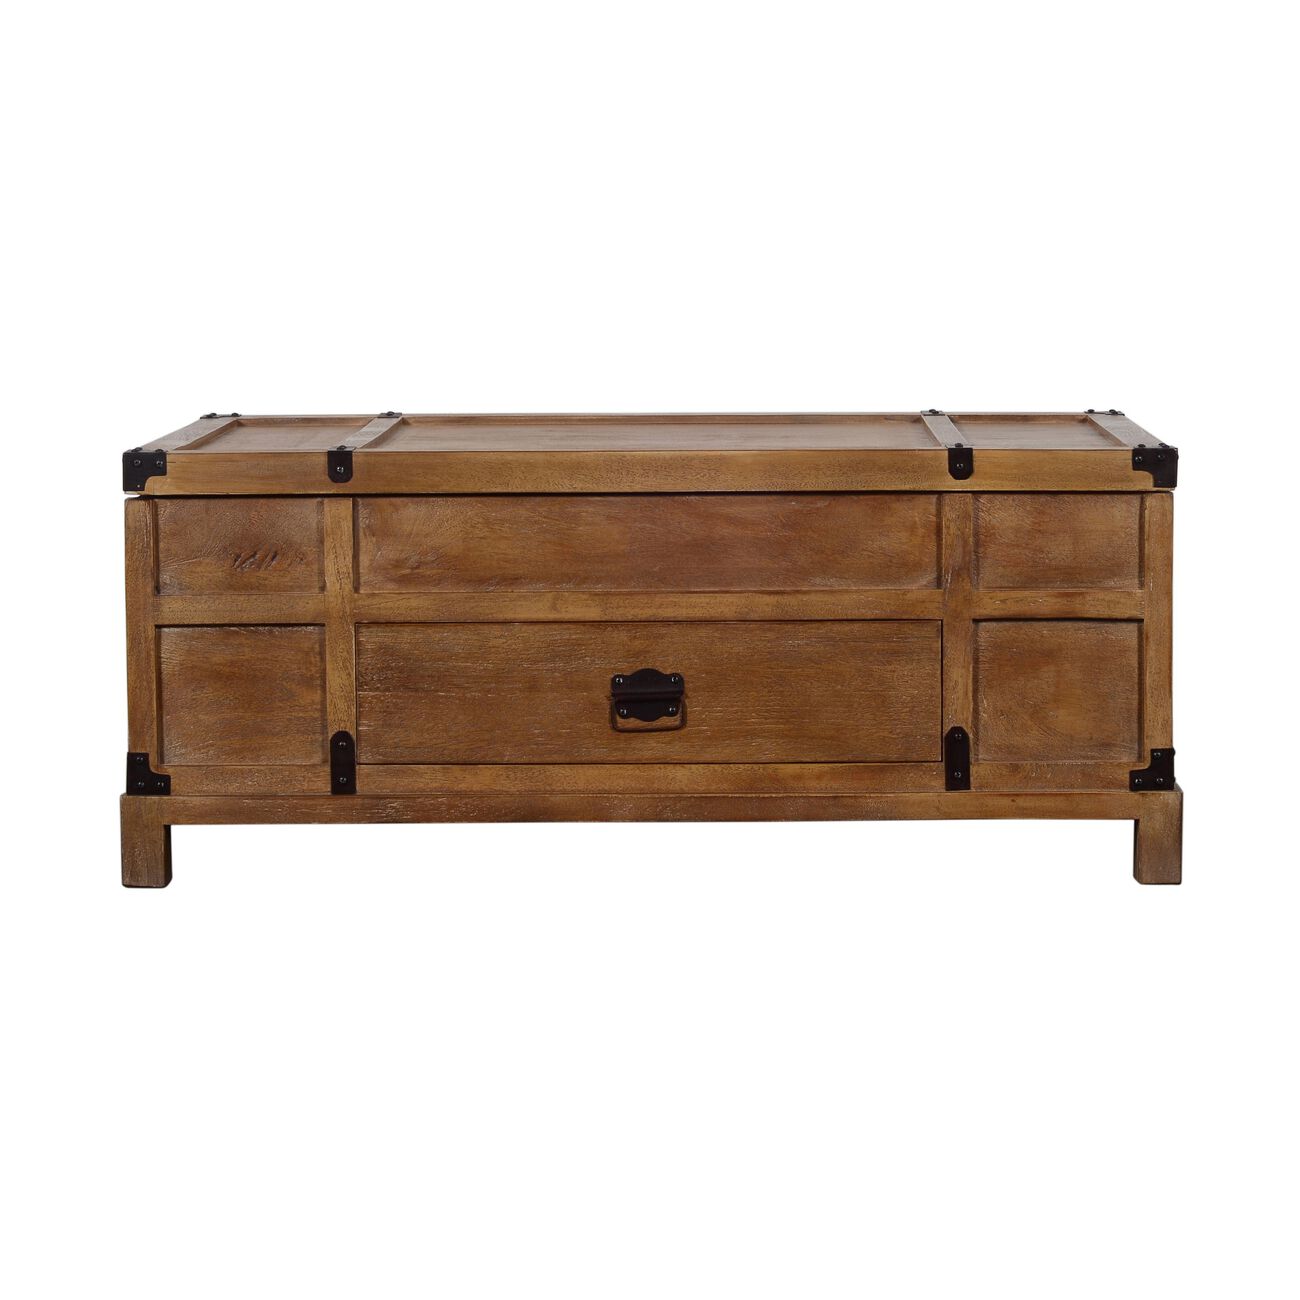 Rustic Single Drawer Mango Wood Coffee Table with Lift Top Storage & Compartments, Brown